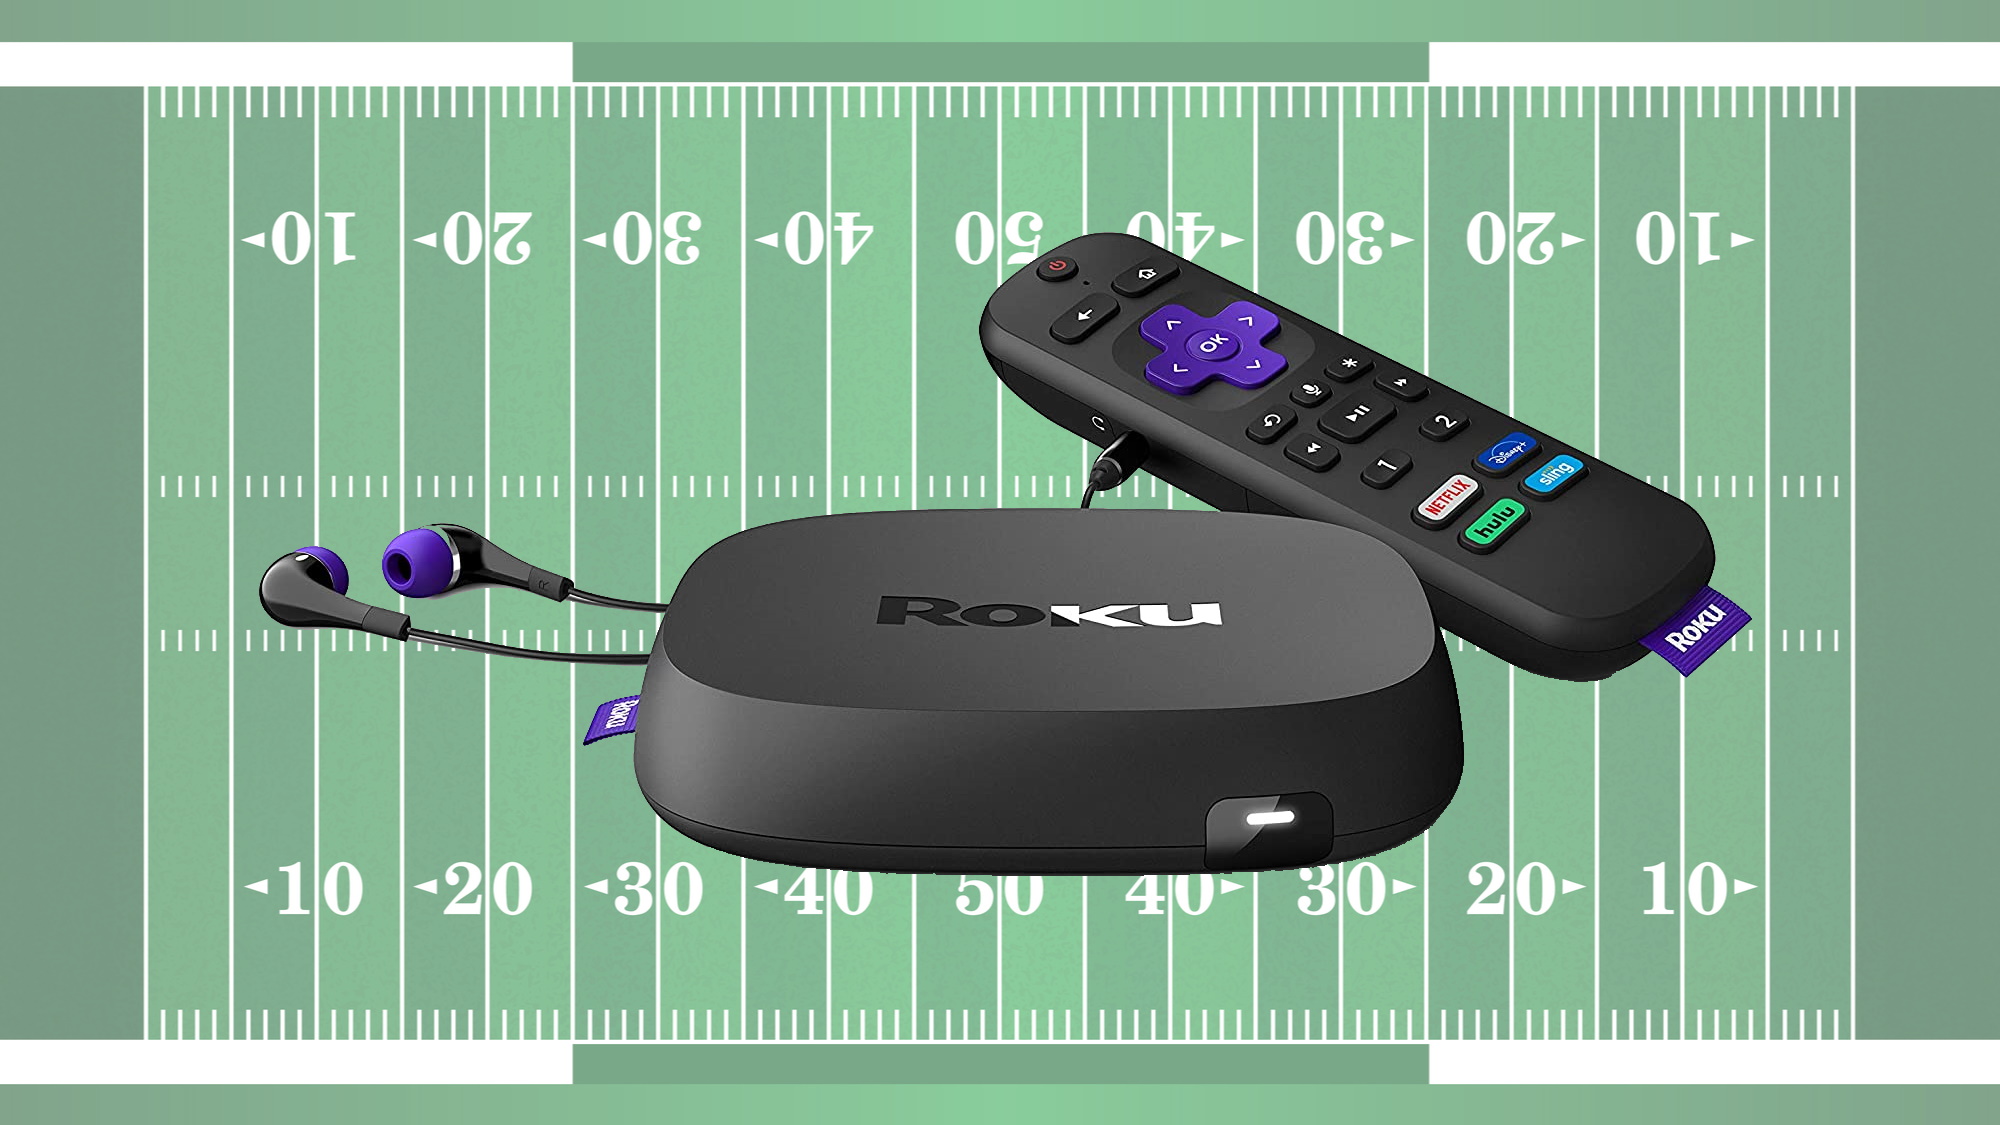 Watching Super Bowl 2021 on Roku: all you need to know to see it